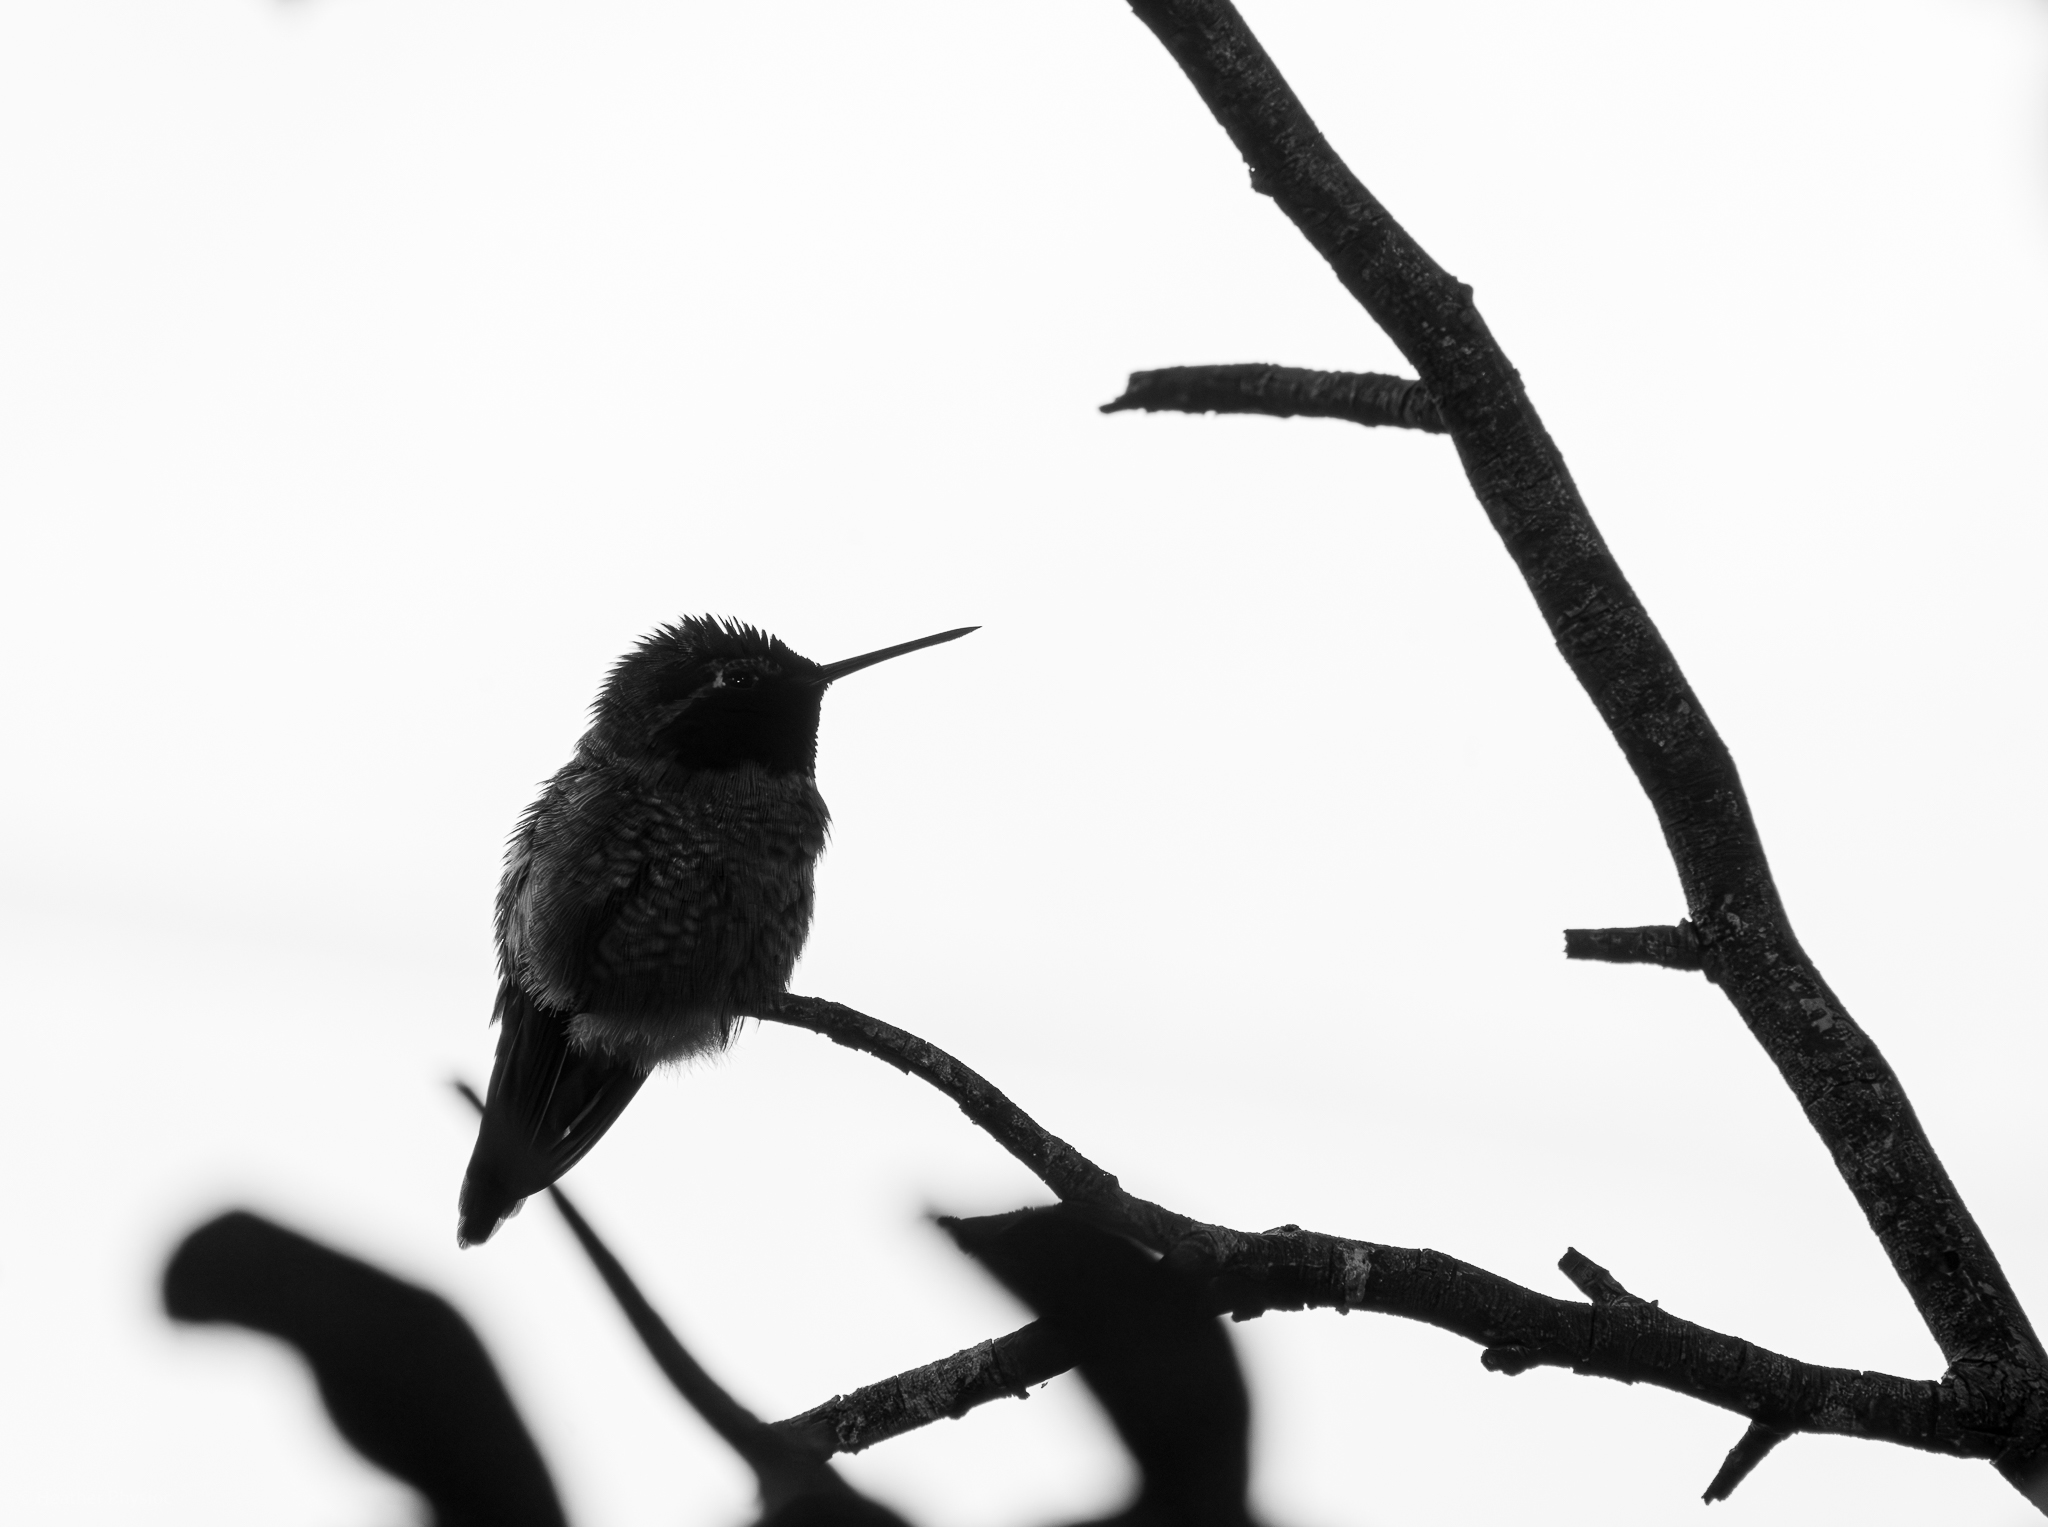 Near-silhouetted Anna's Hummingbird in black-and-white against a white background perched on a branch in the San Diego Zoo aviary